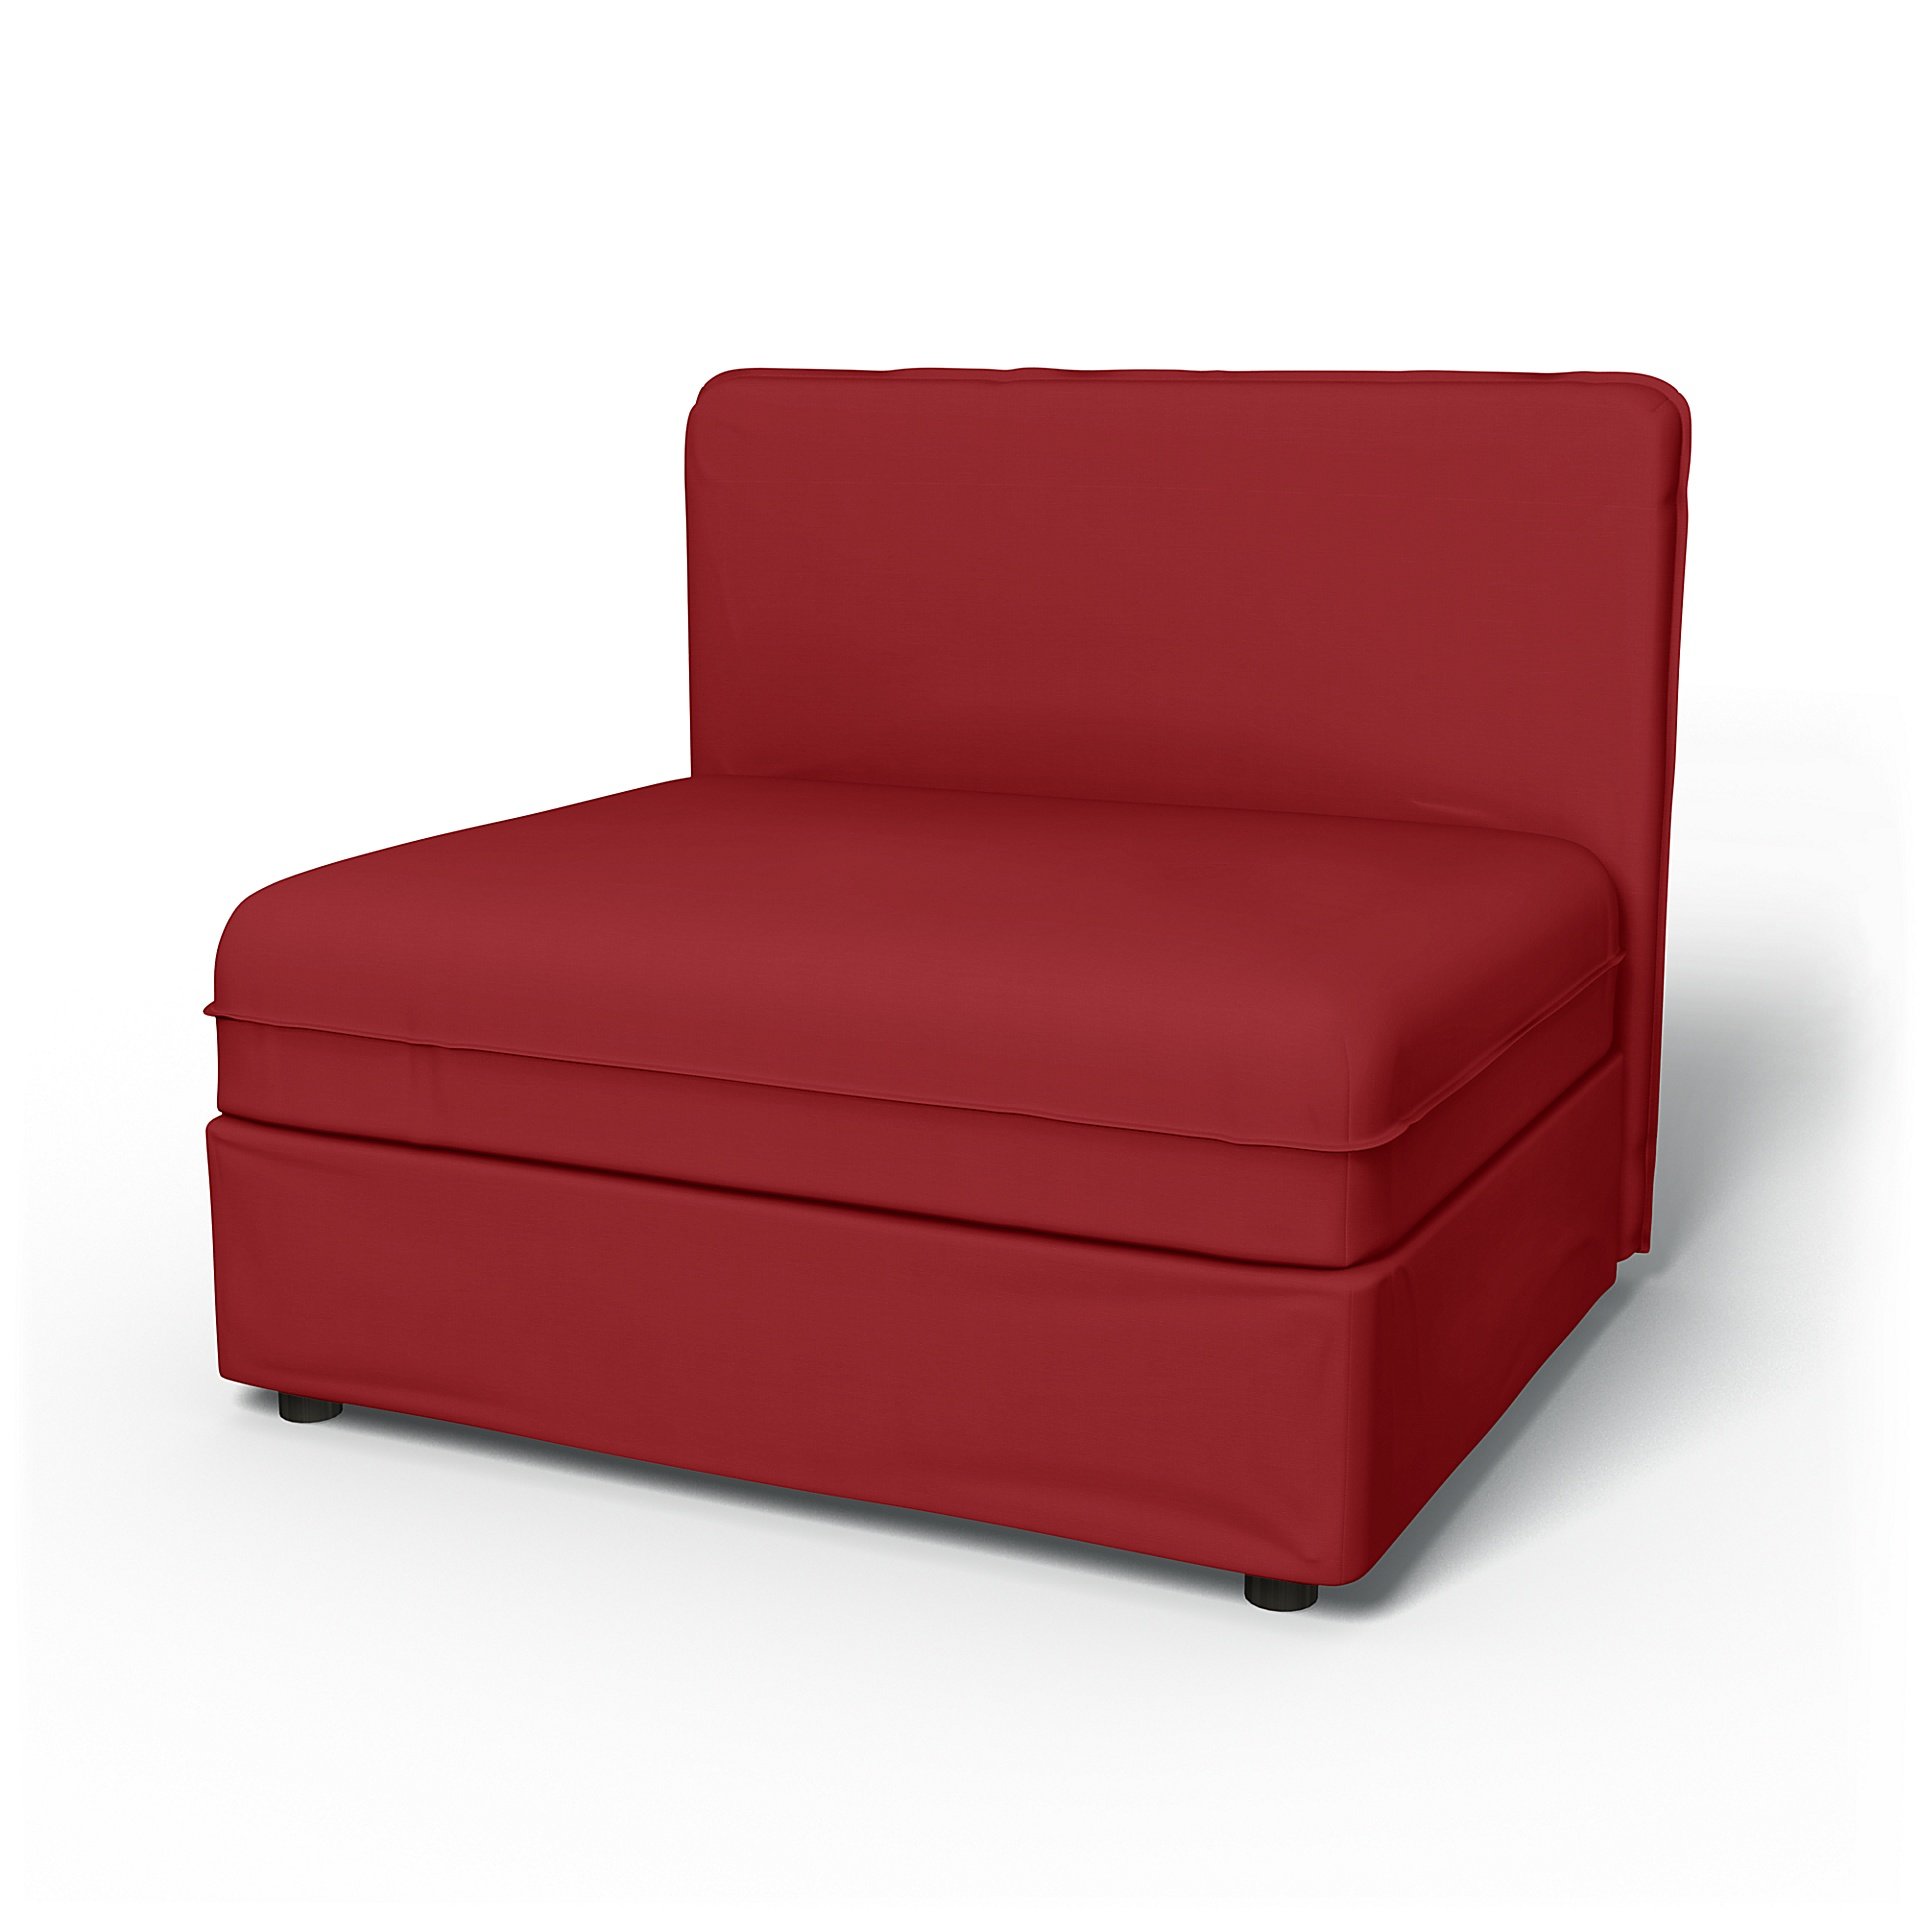 IKEA - Vallentuna Seat Module with Low Back Cover 100x80cm 39x32in, Scarlet Red, Cotton - Bemz